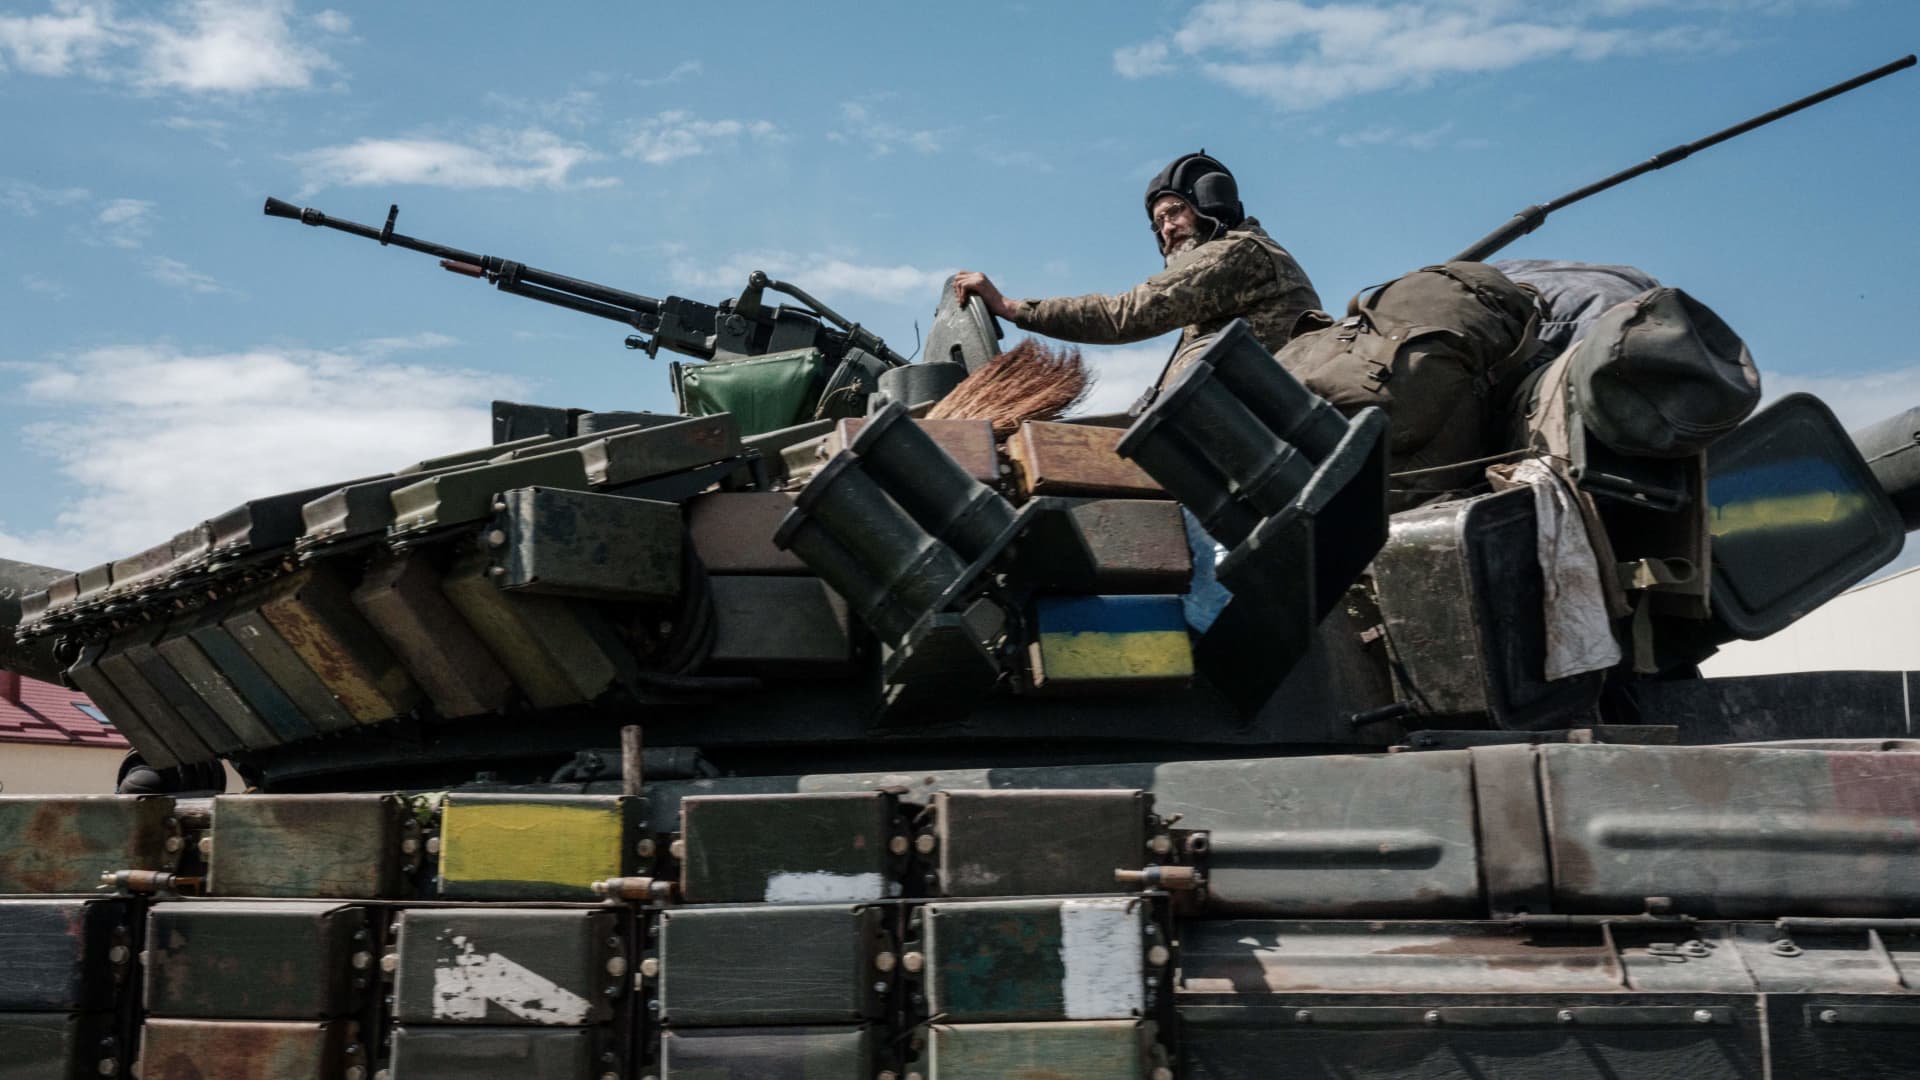 A Ukrainian soldier sits on a tank carryied by a transporter near Bakhmut, eastern Ukraine, on May 12, 2022, amid the Russian invasion of Ukraine.